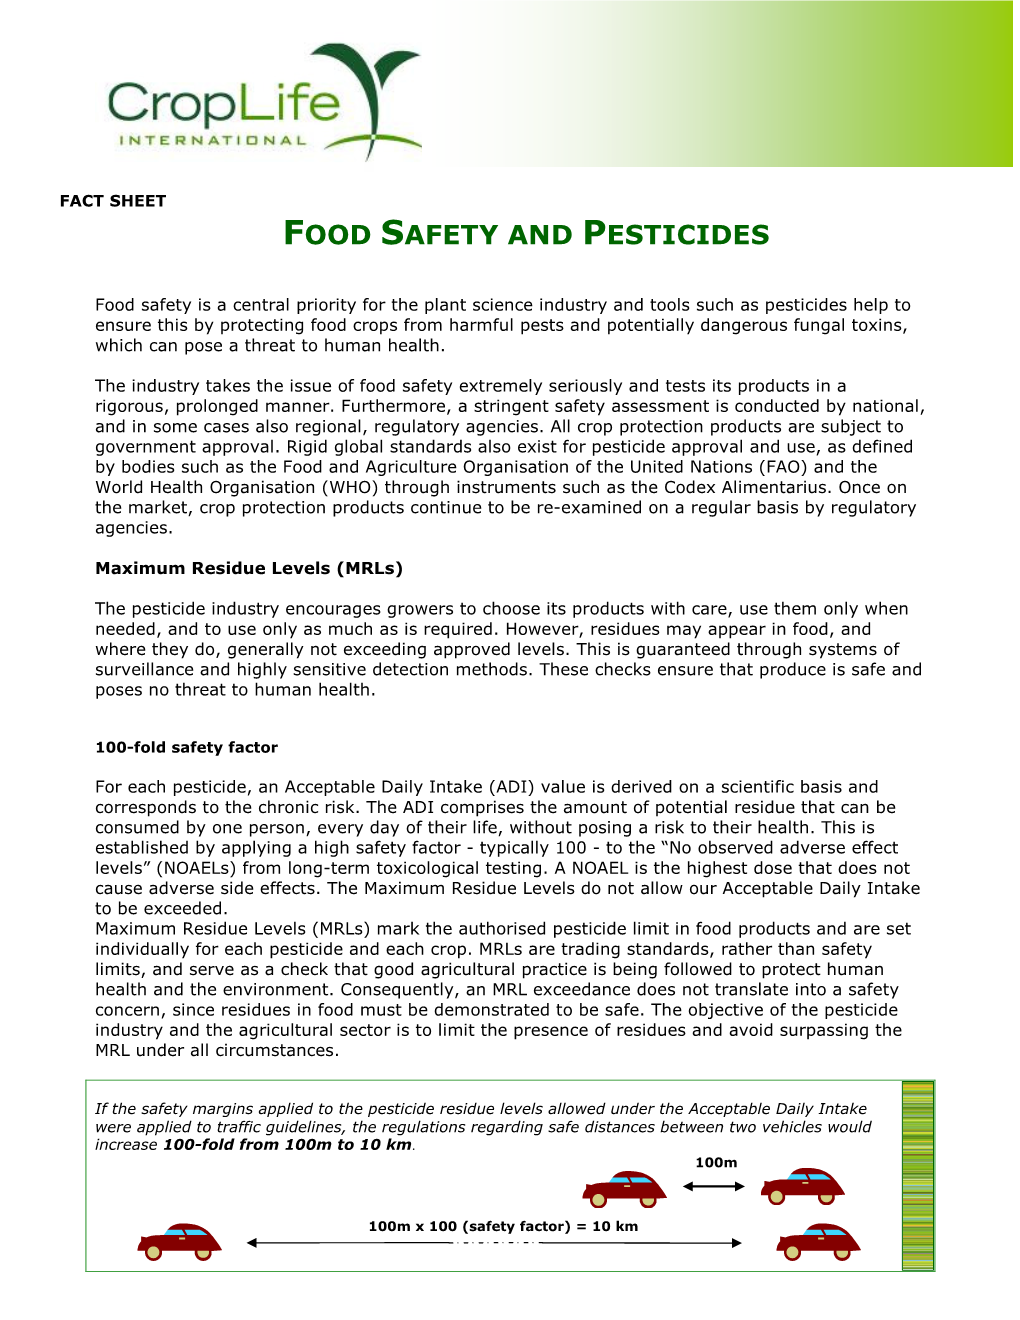 Food Safety and Pesticides